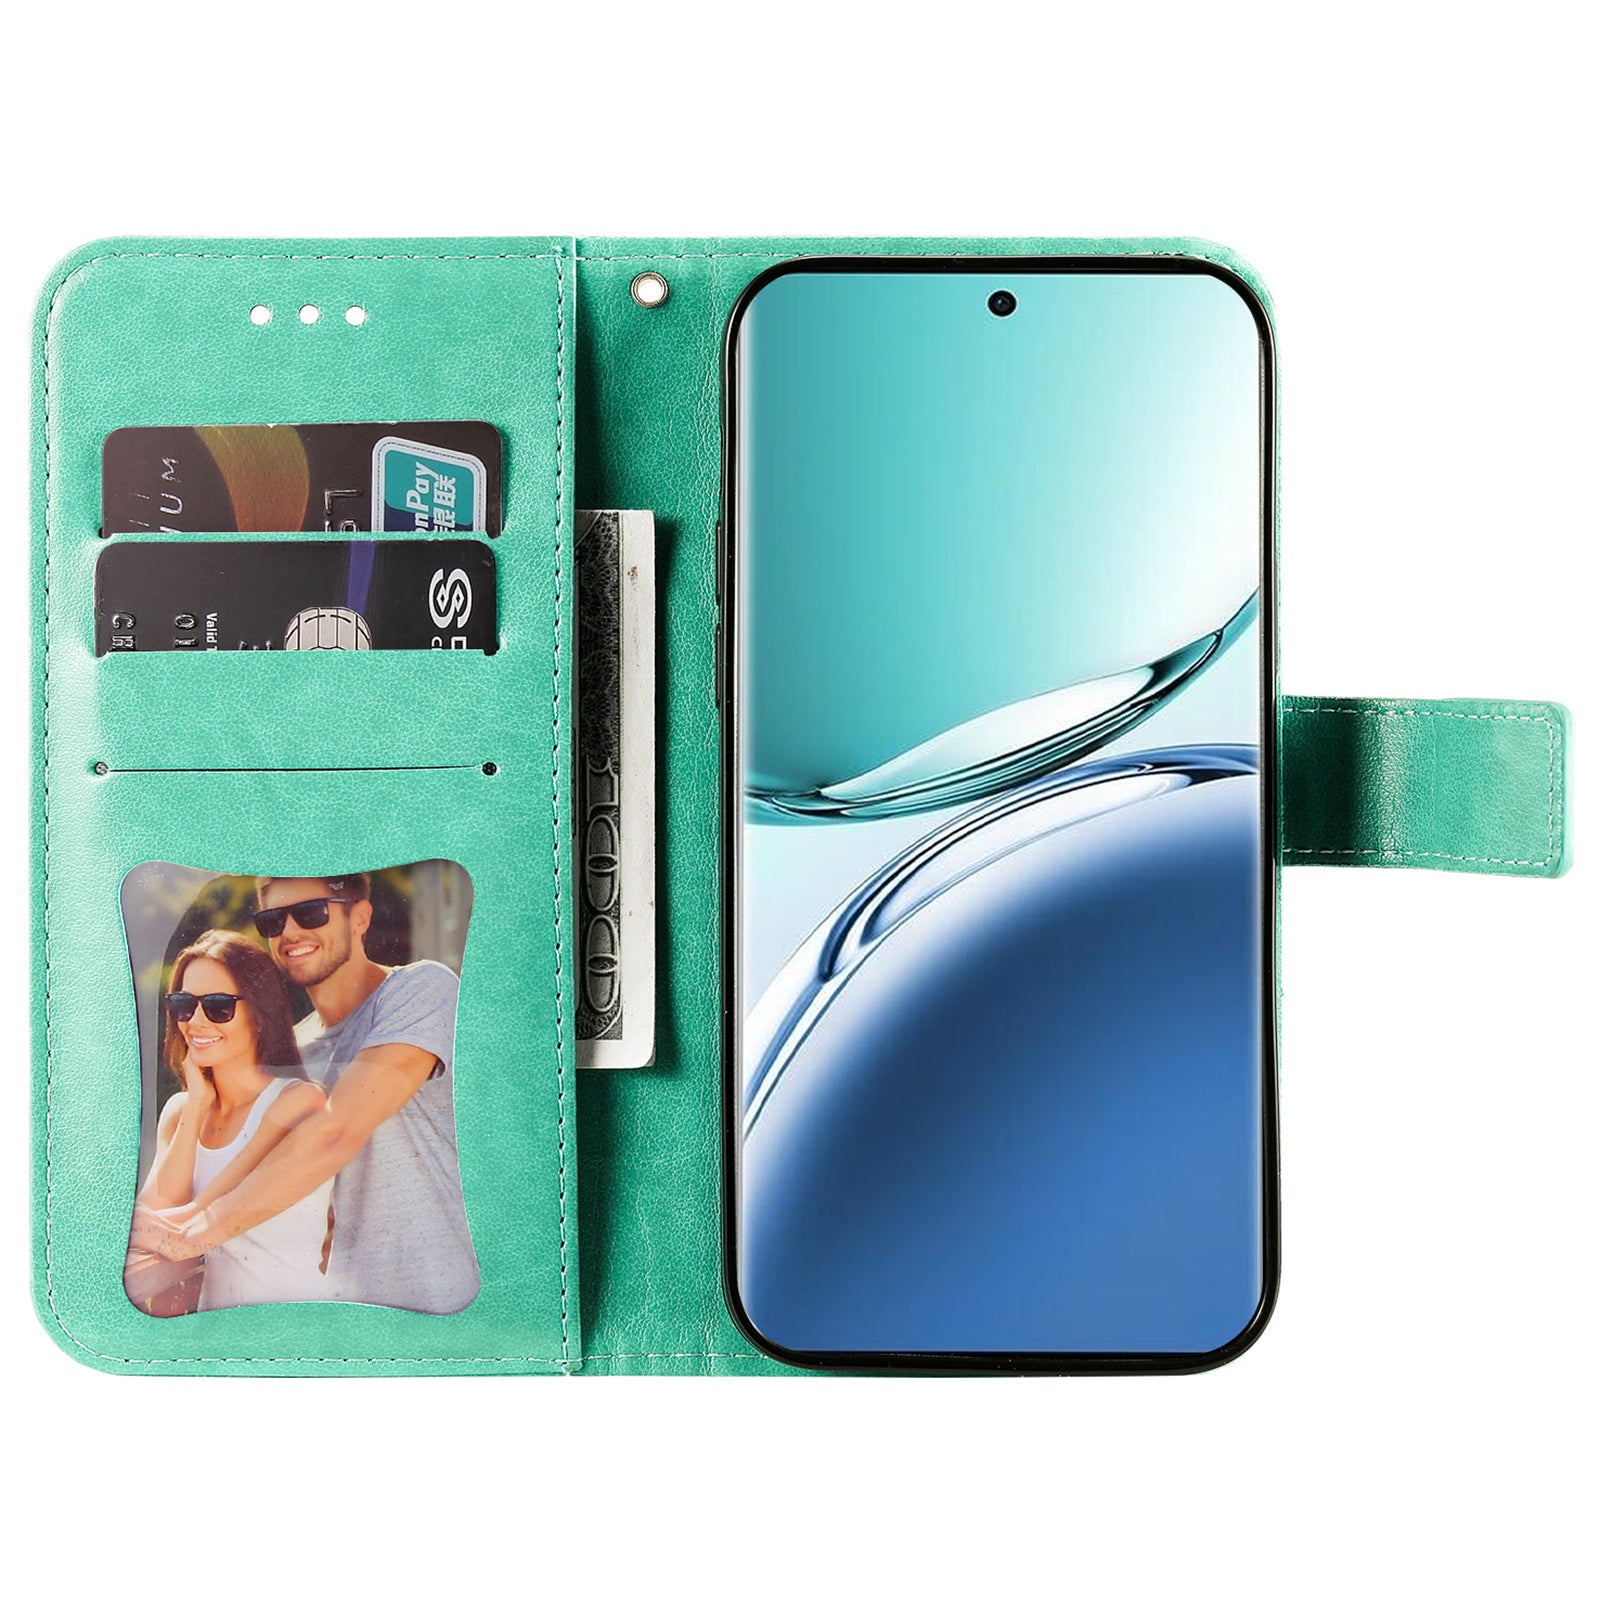 For Oppo A3 Pro 5G Wallet Case Flower Pattern PU Leather Phone Cover with Magnetic Clasp - Green